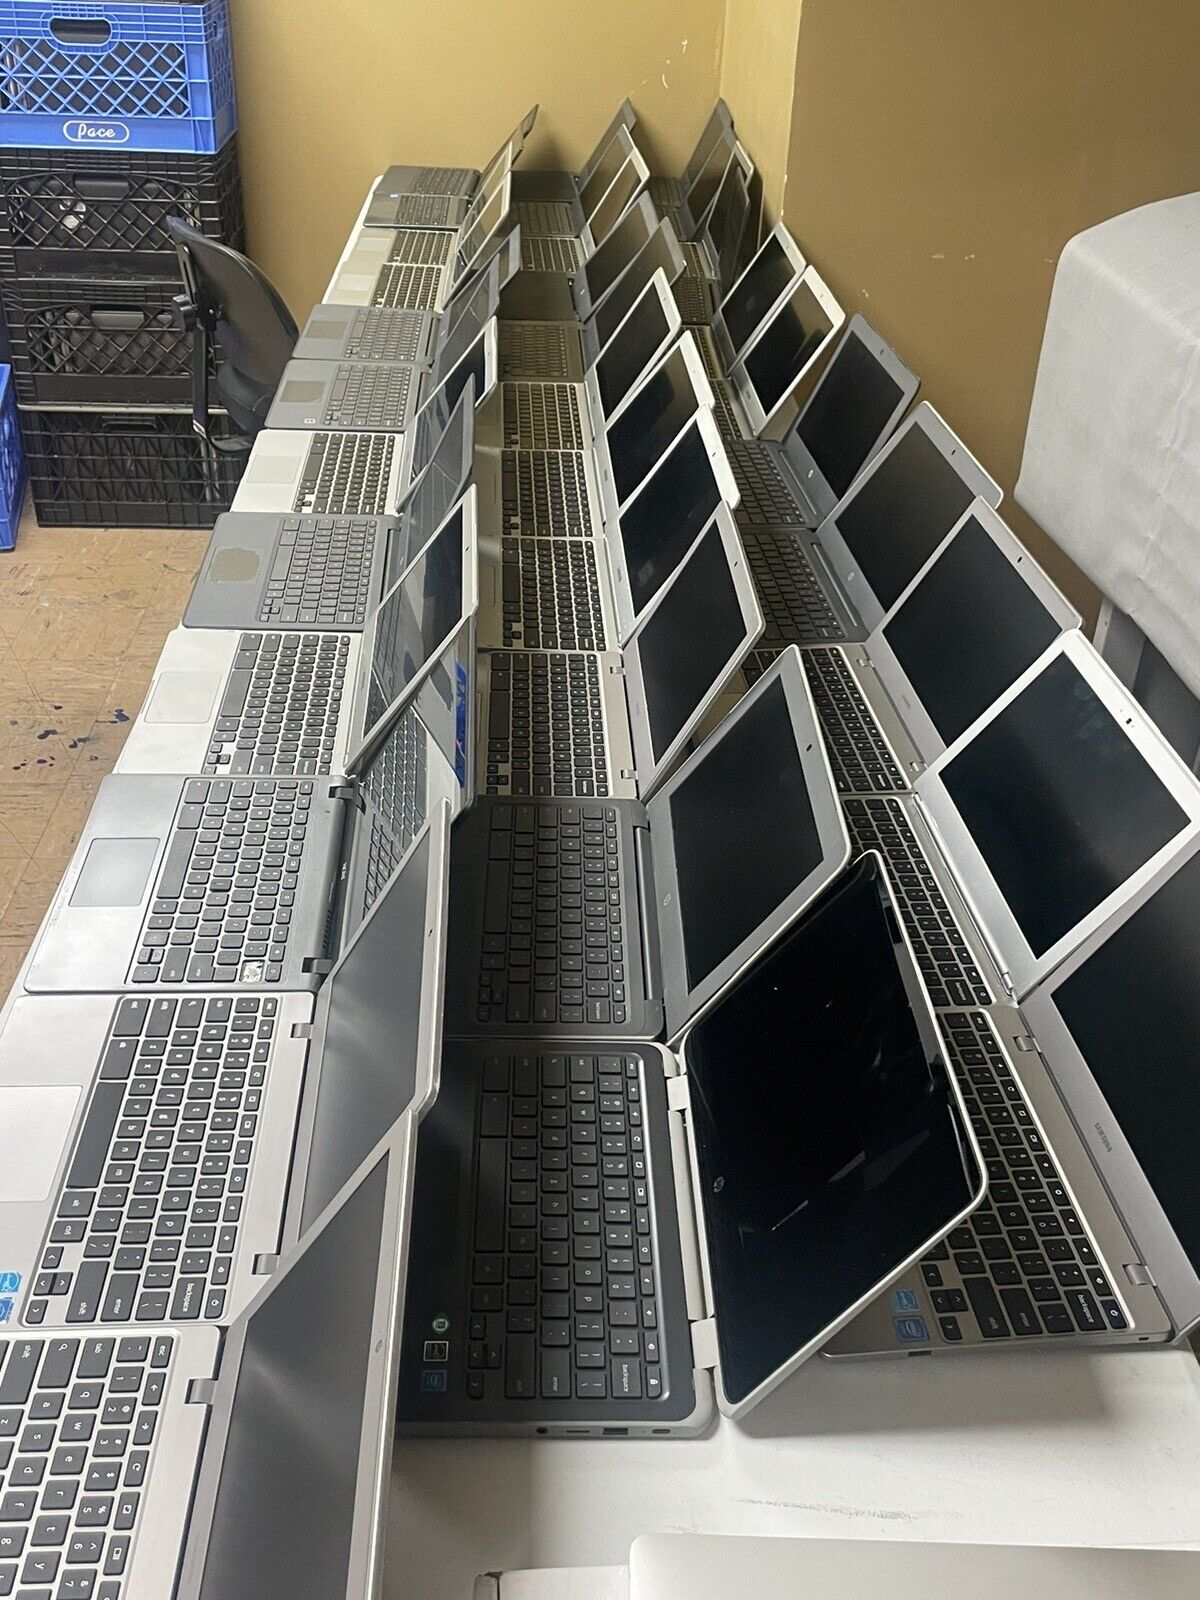 A Lot Of 15 PCs HP Chromebook  11.6 inch Samsung And Mixed Working Condition